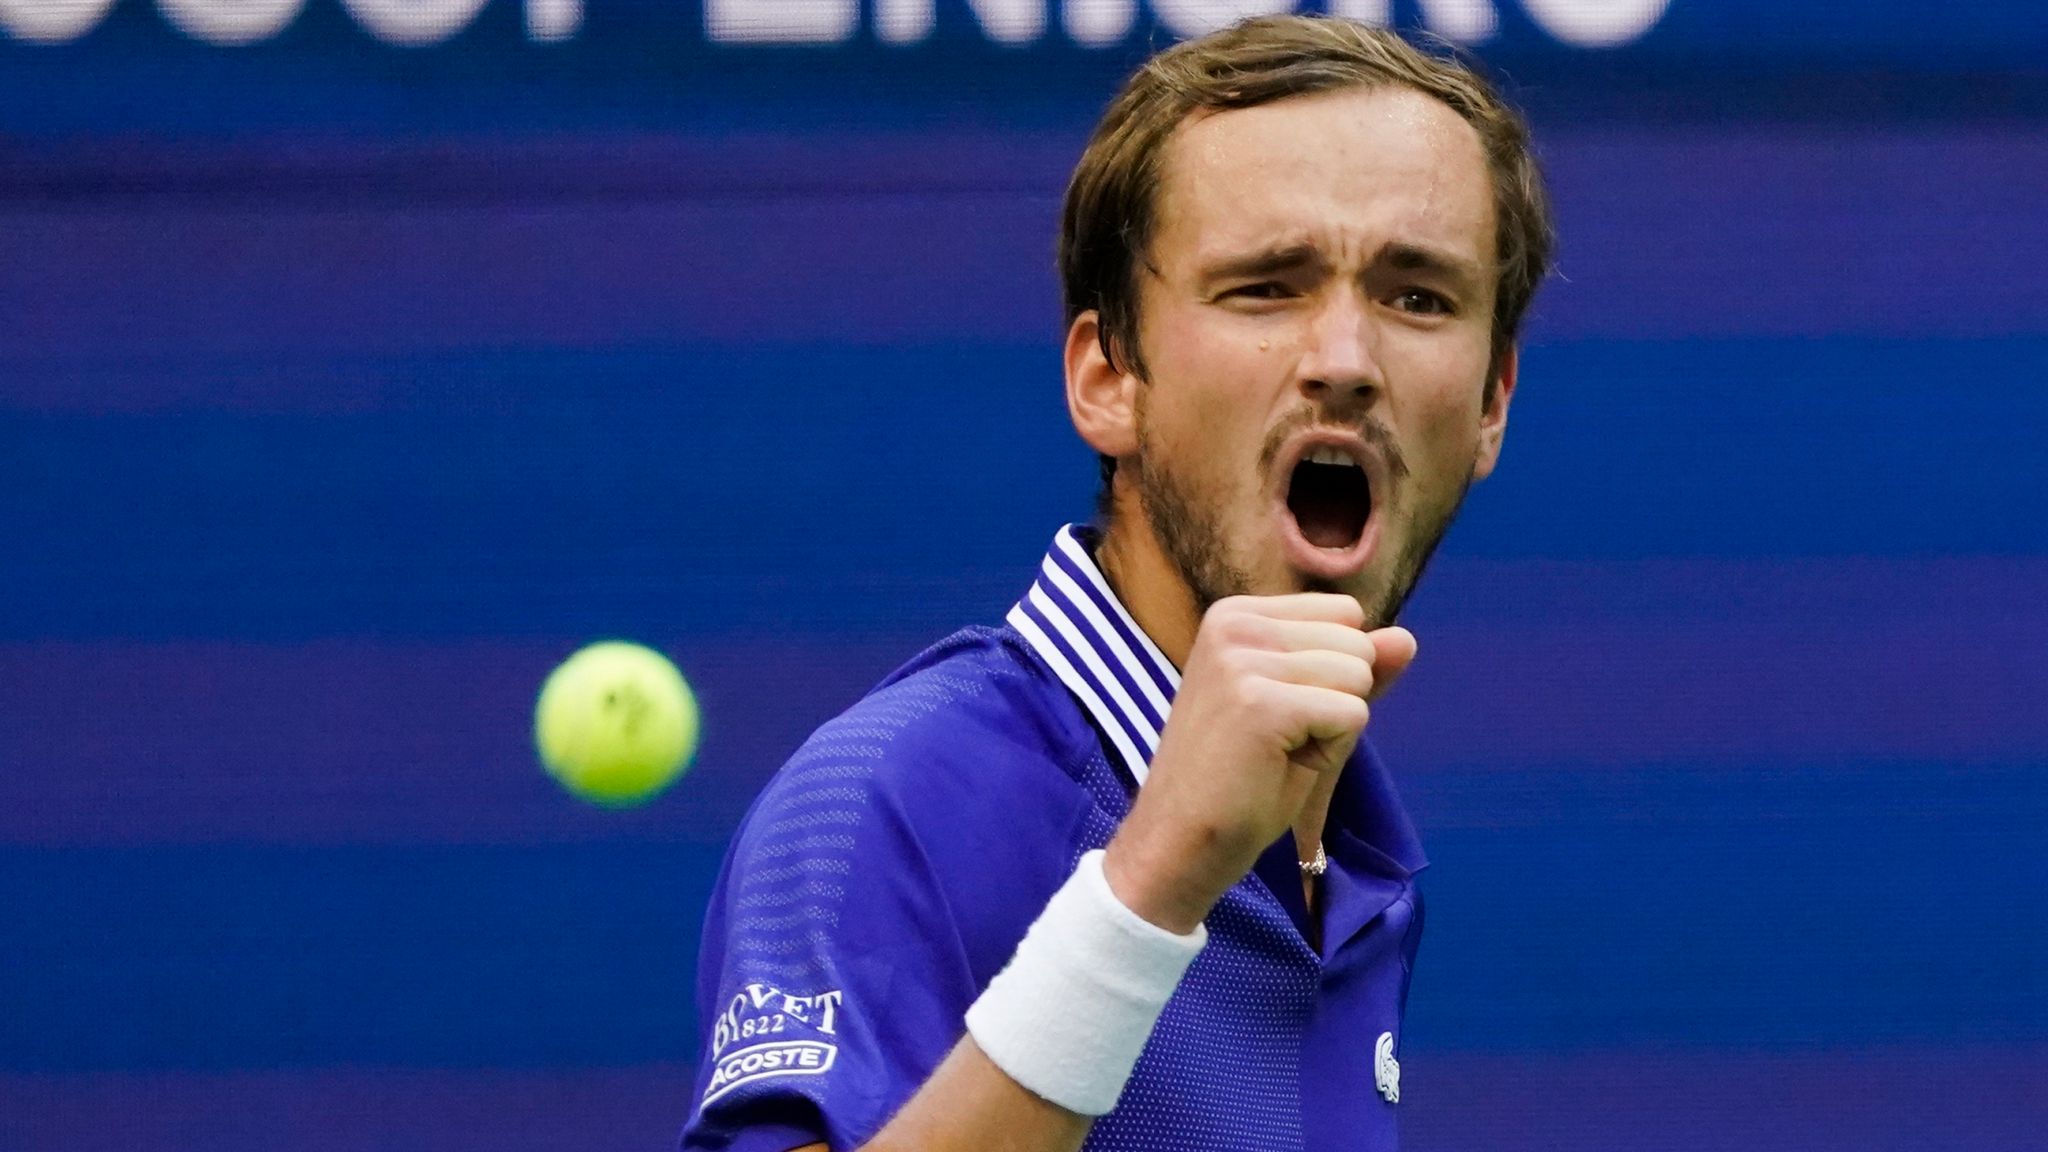 US Open: Daniil Medvedev makes it through to his second final in New York |  Tennis News | Sky Sports